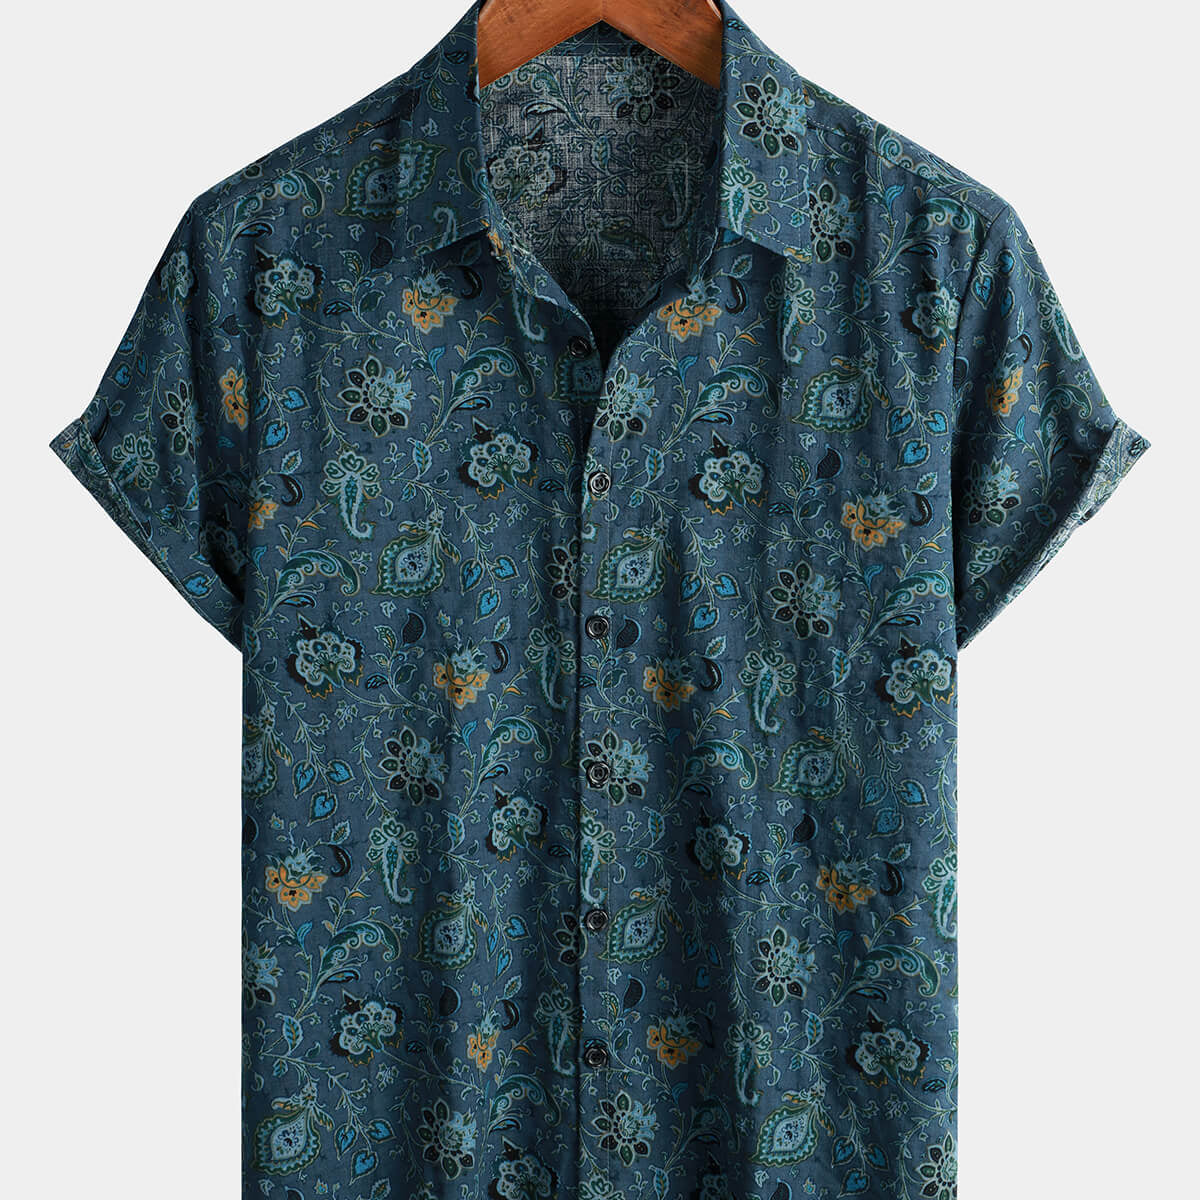 Men's Paisley Vintage Floral Retro Button Up Blue Summer Holiday Short Sleeve Shirt